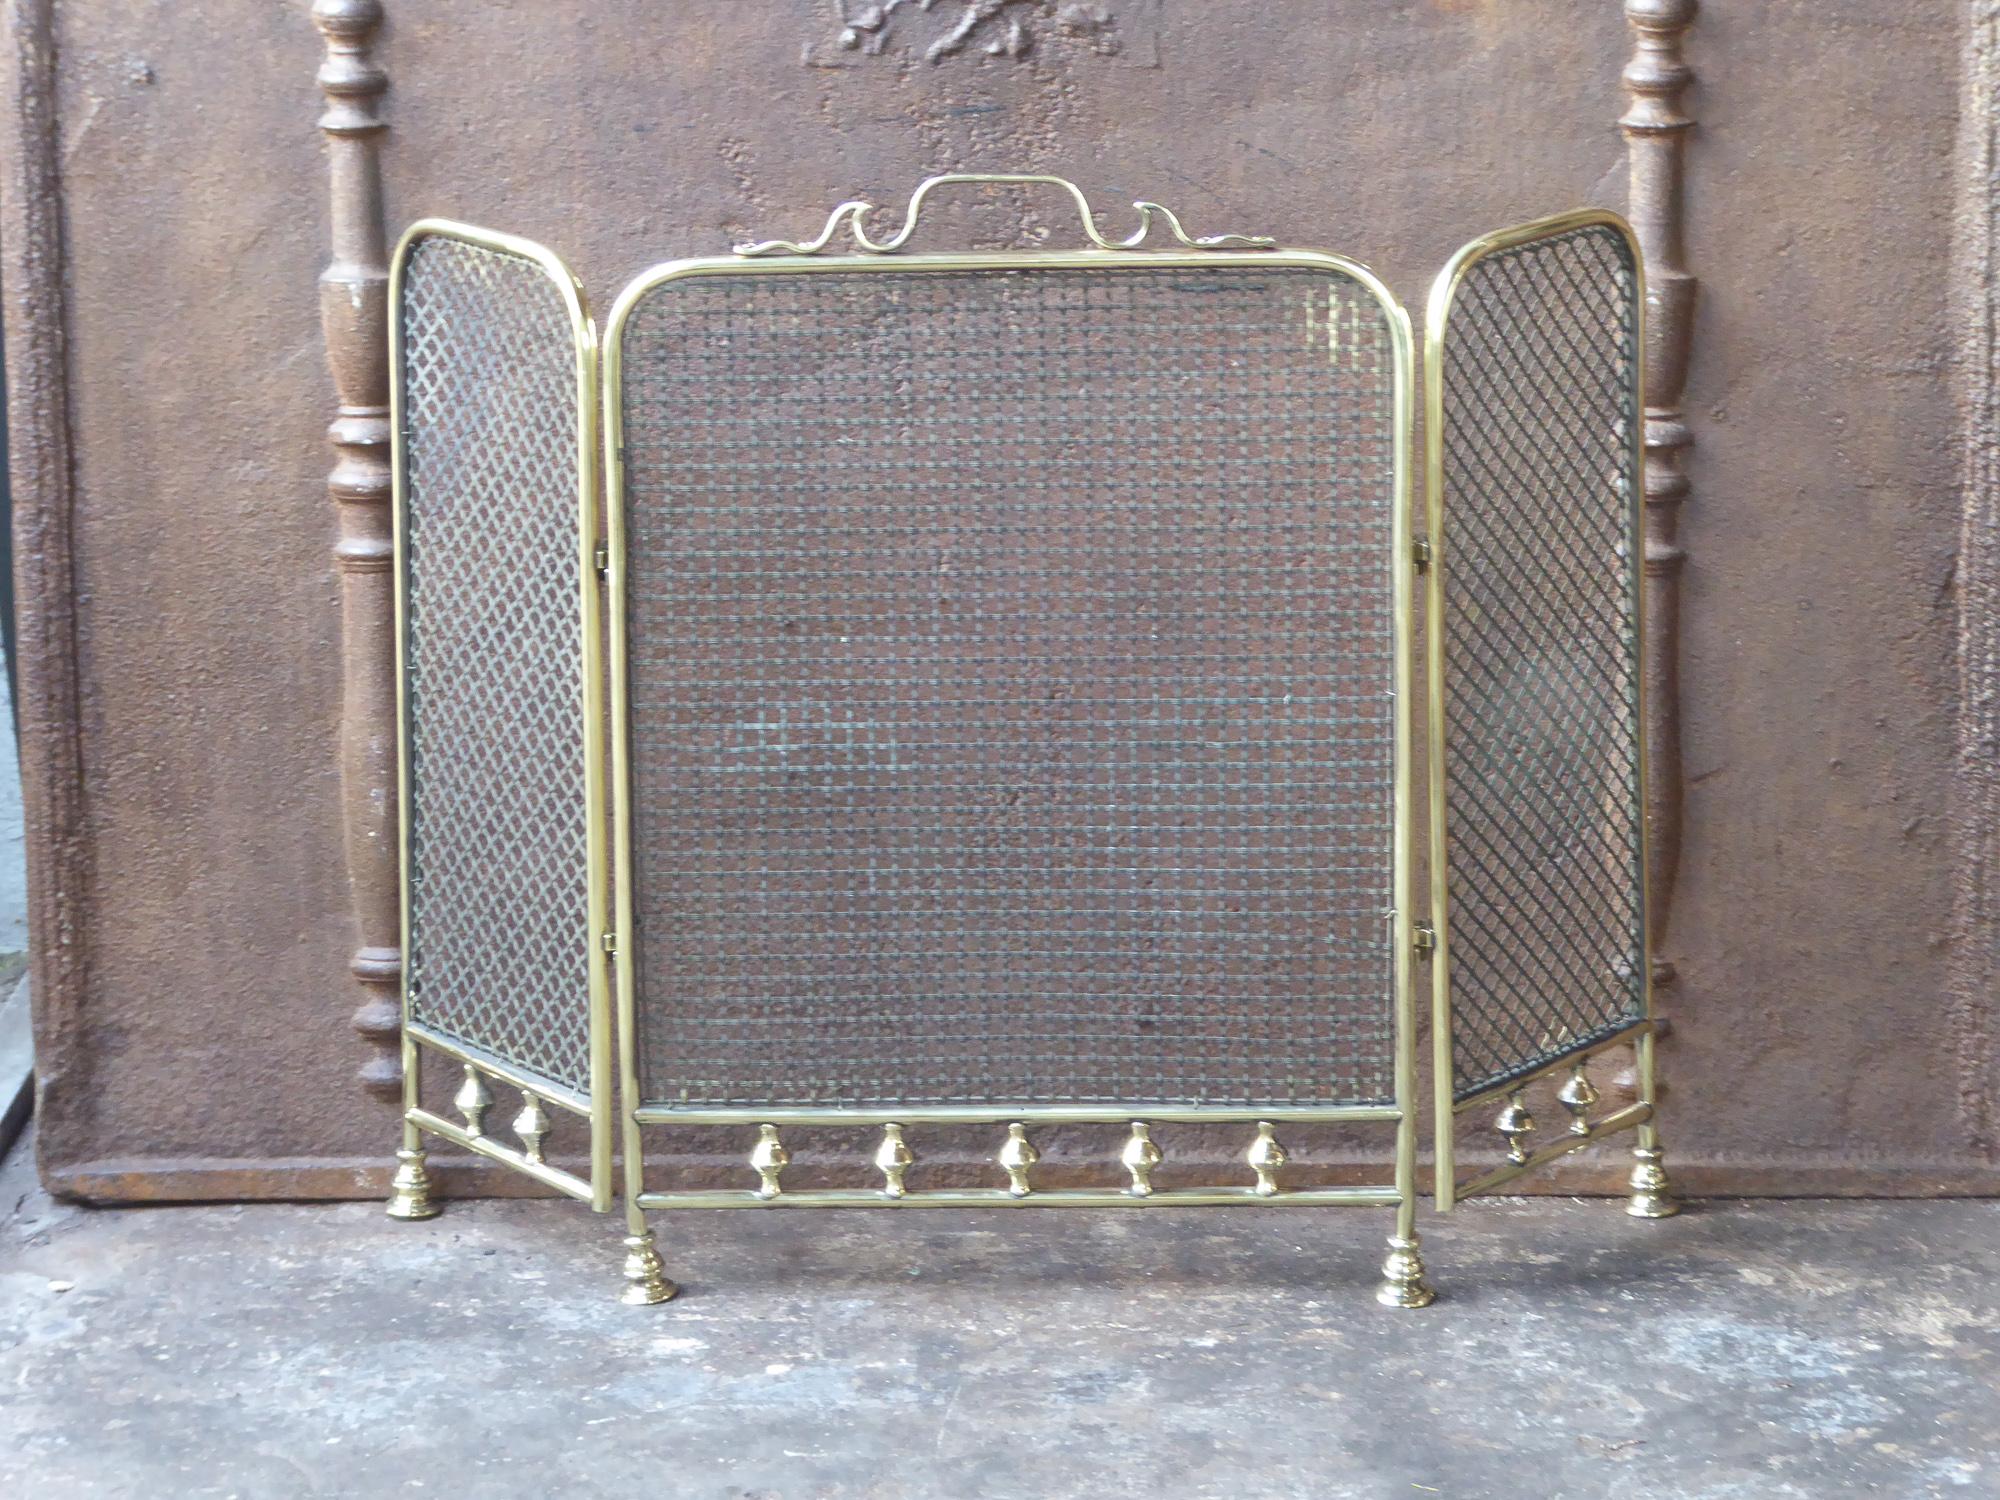 19th century English Victorian fireplace screen made of polished brass and iron mesh.

We have a unique and specialized collection of antique and used fireplace accessories consisting of more than 1000 listings at 1stdibs. Amongst others we always